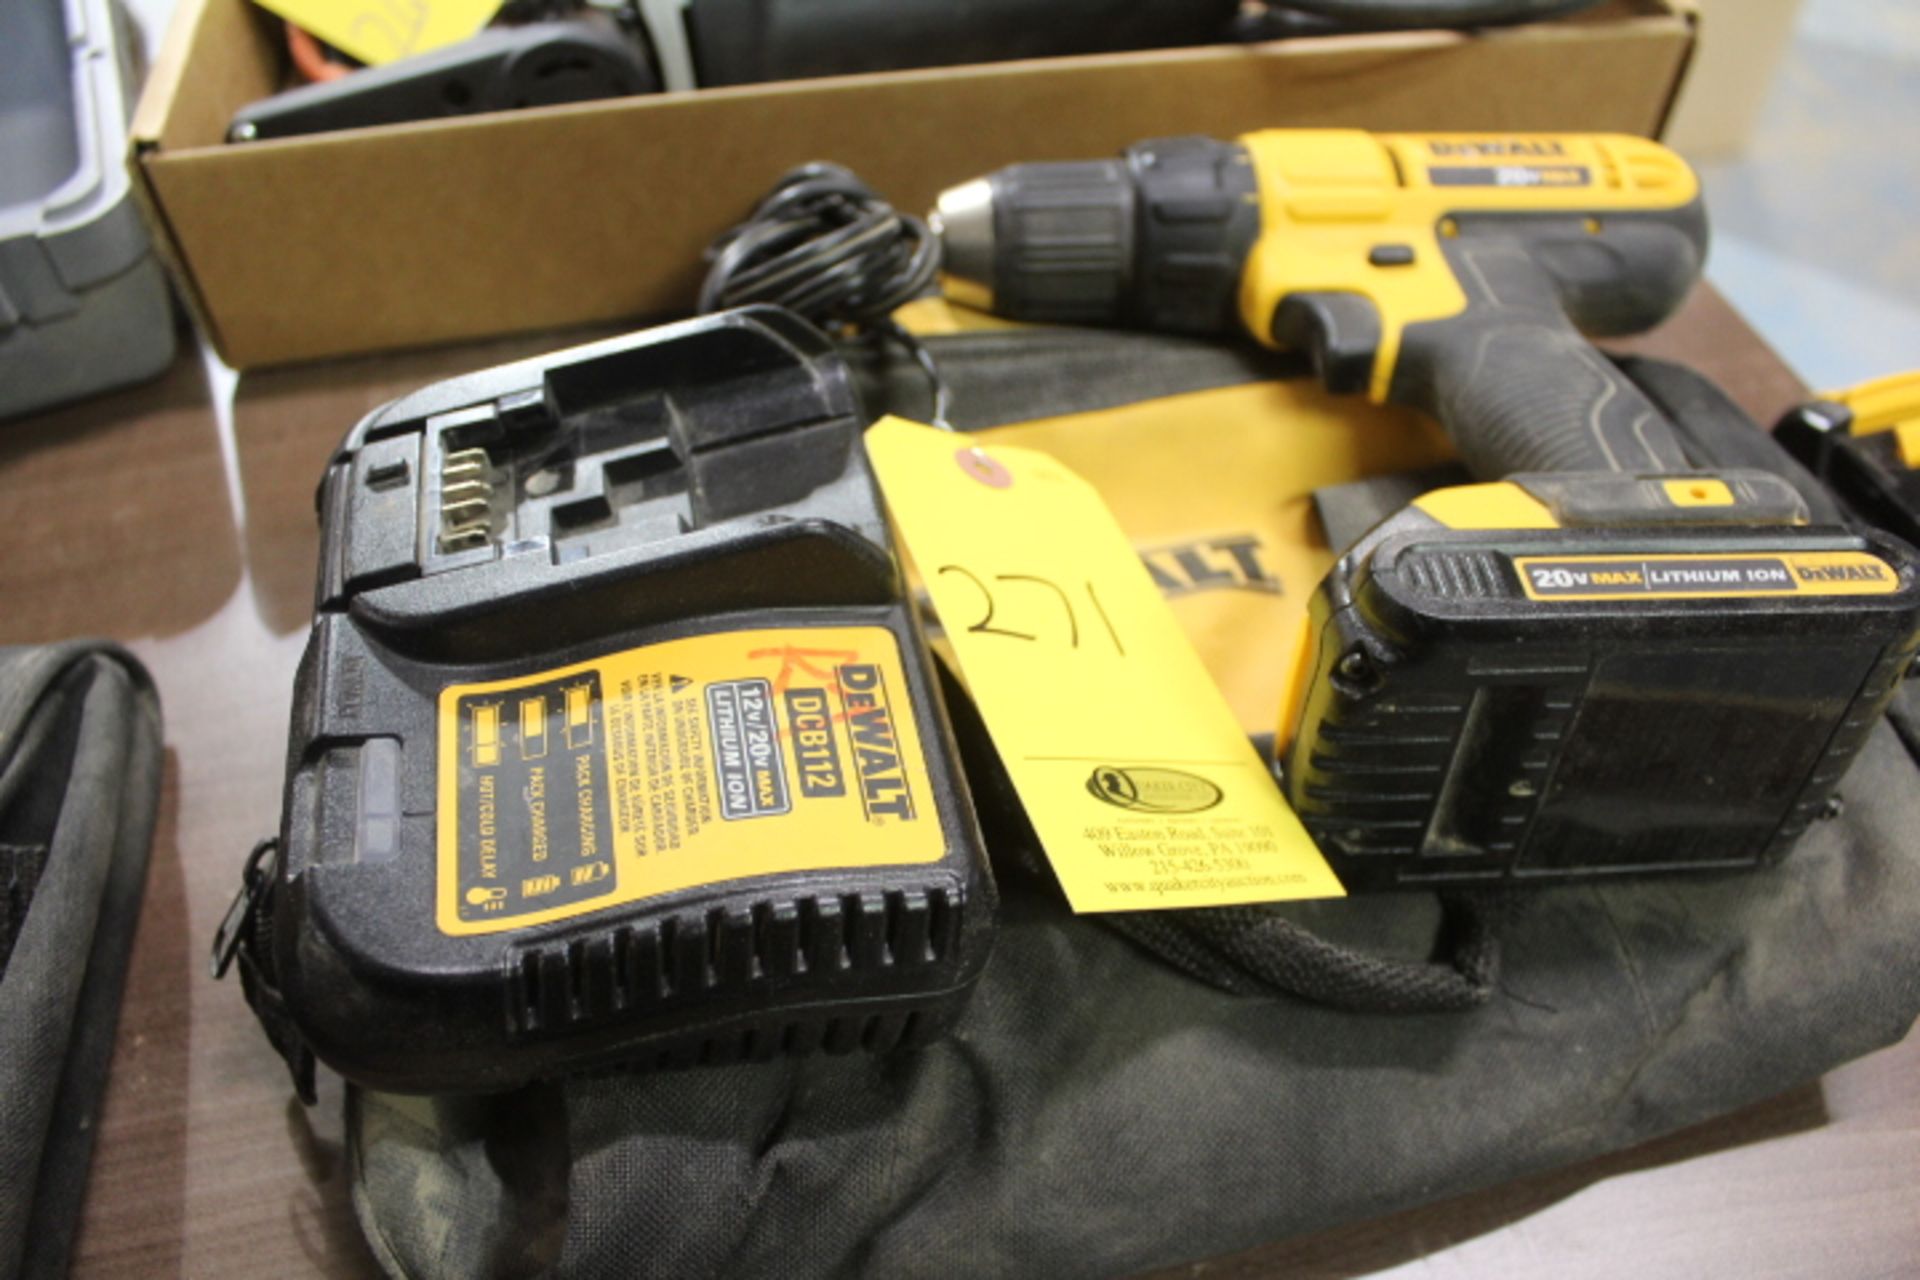 DEWALT 2OV CORDLESS 1/2 IN DRILL DRIVER WITH BATTERY, CHARGER AND CASE